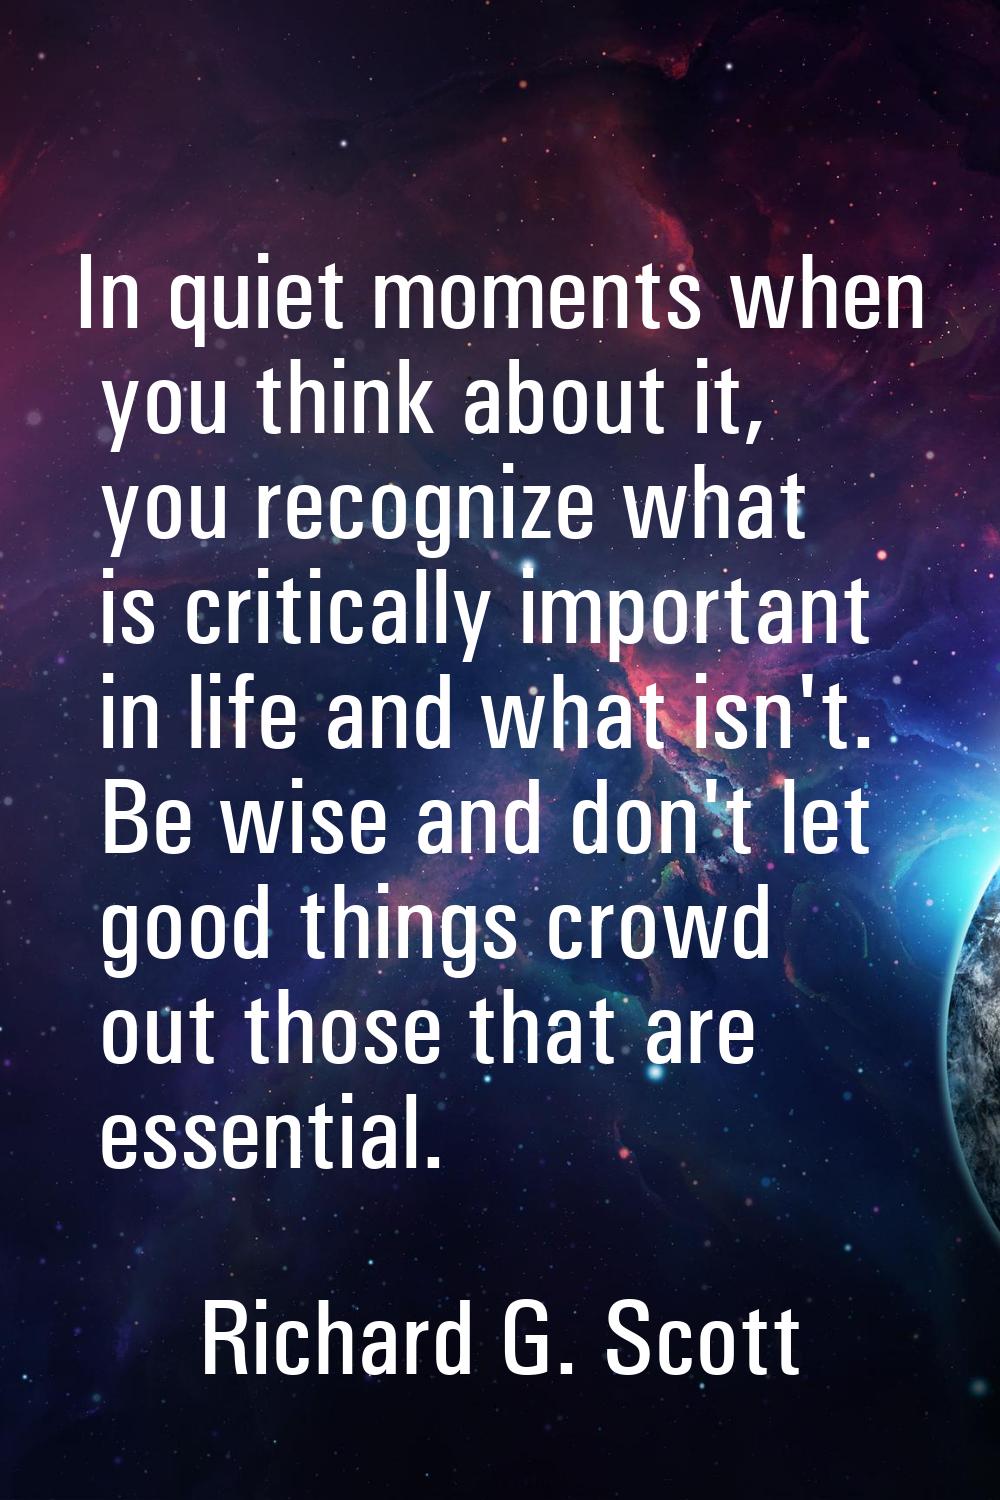 In quiet moments when you think about it, you recognize what is critically important in life and wh